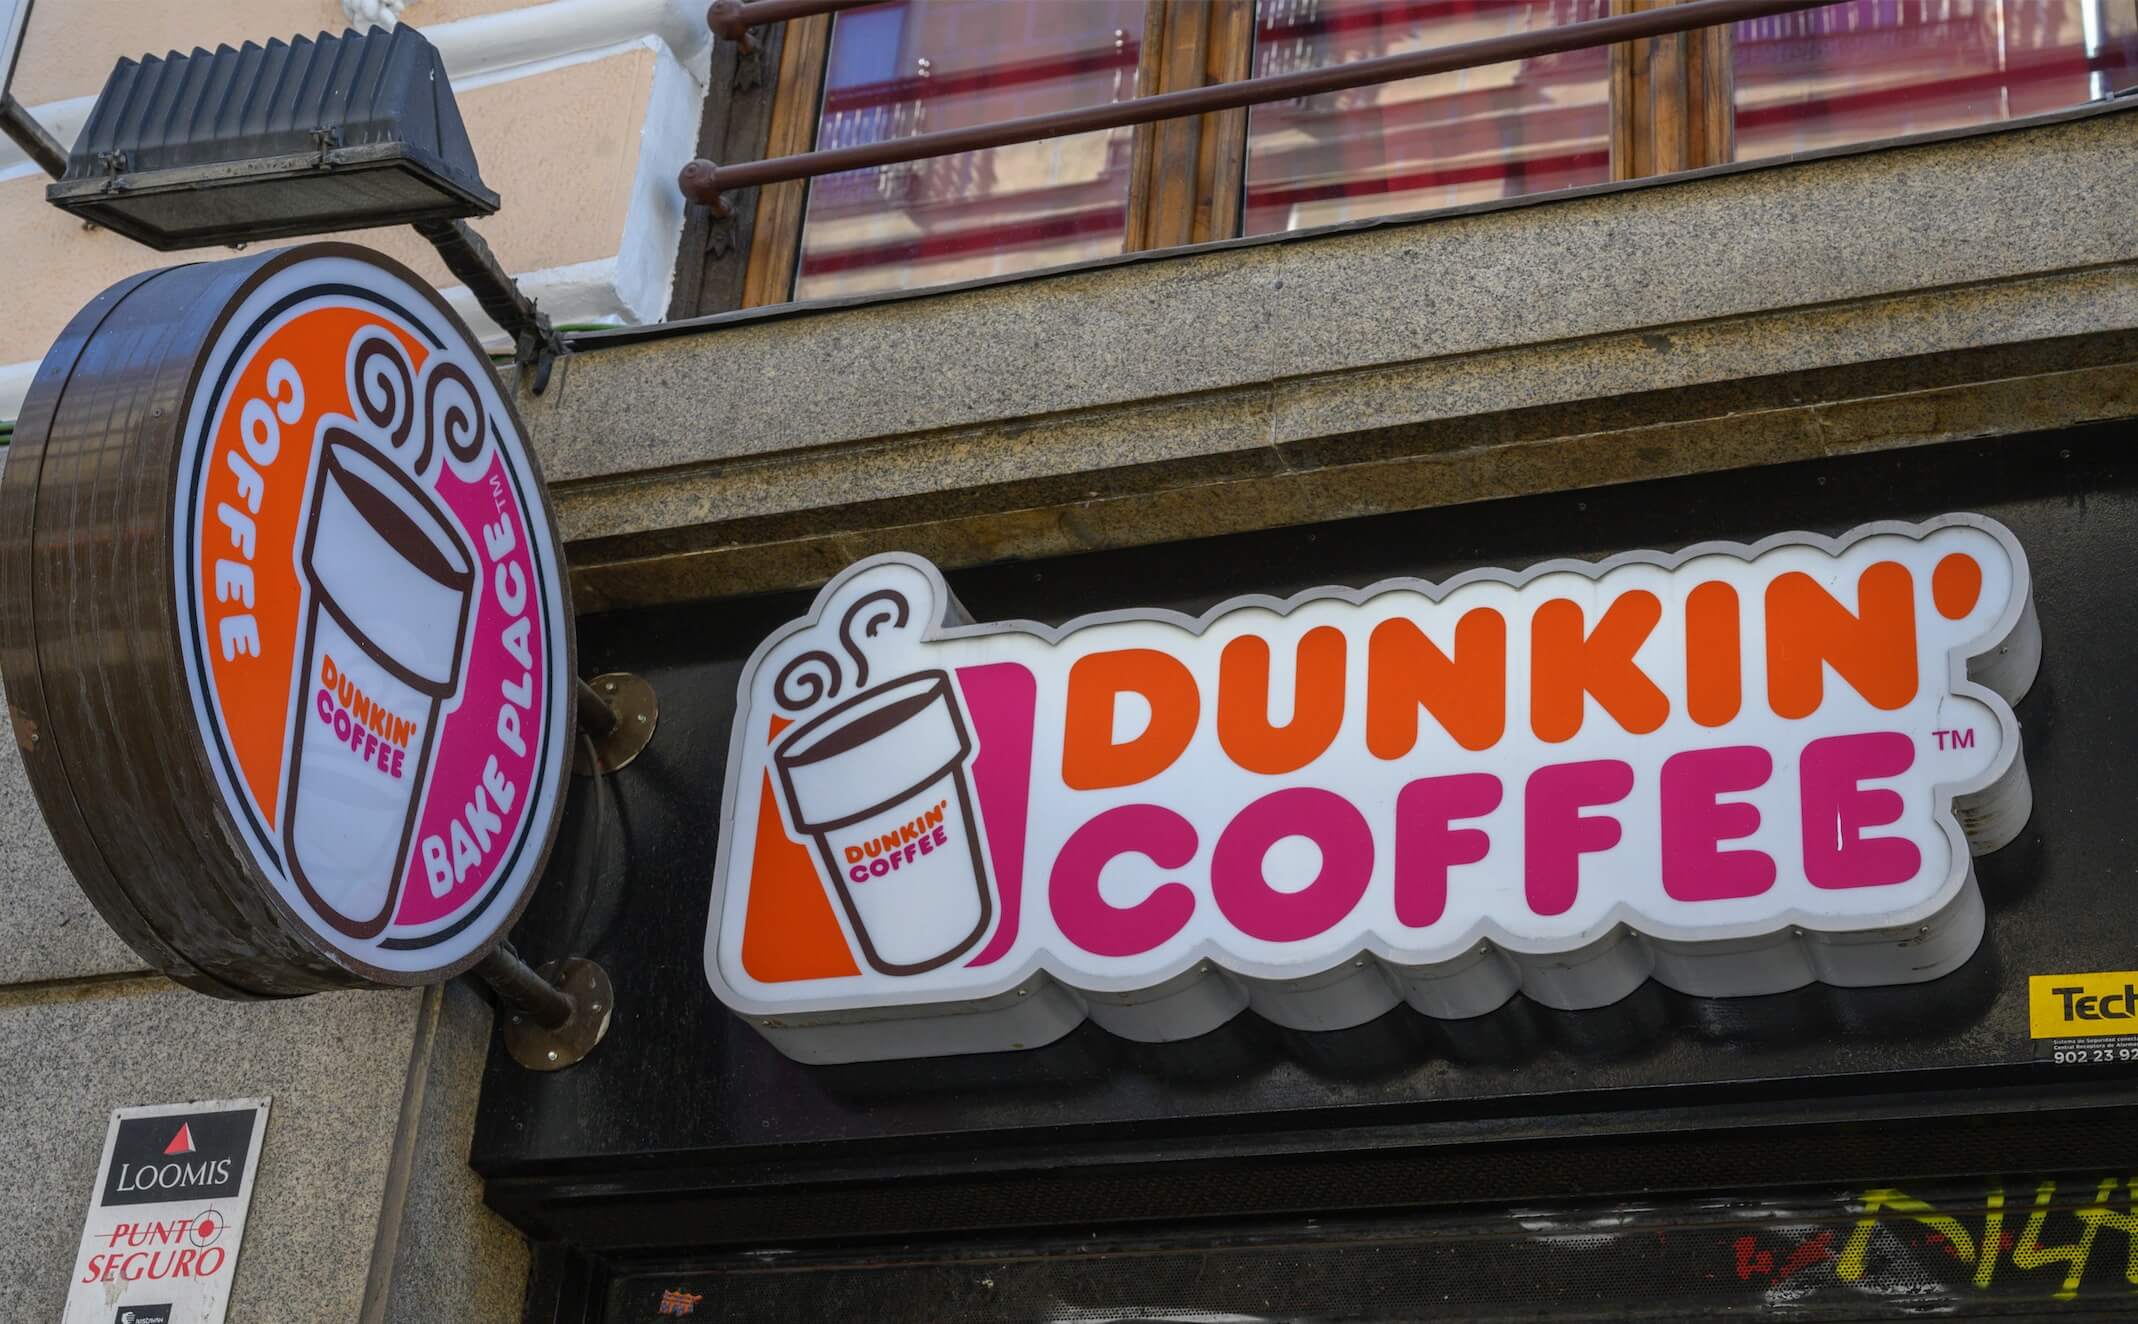 https://www.metro.us/wp-content/uploads/2020/03/is_dunkin_donuts_starbucks_open_closed_on_christmas_day.jpg